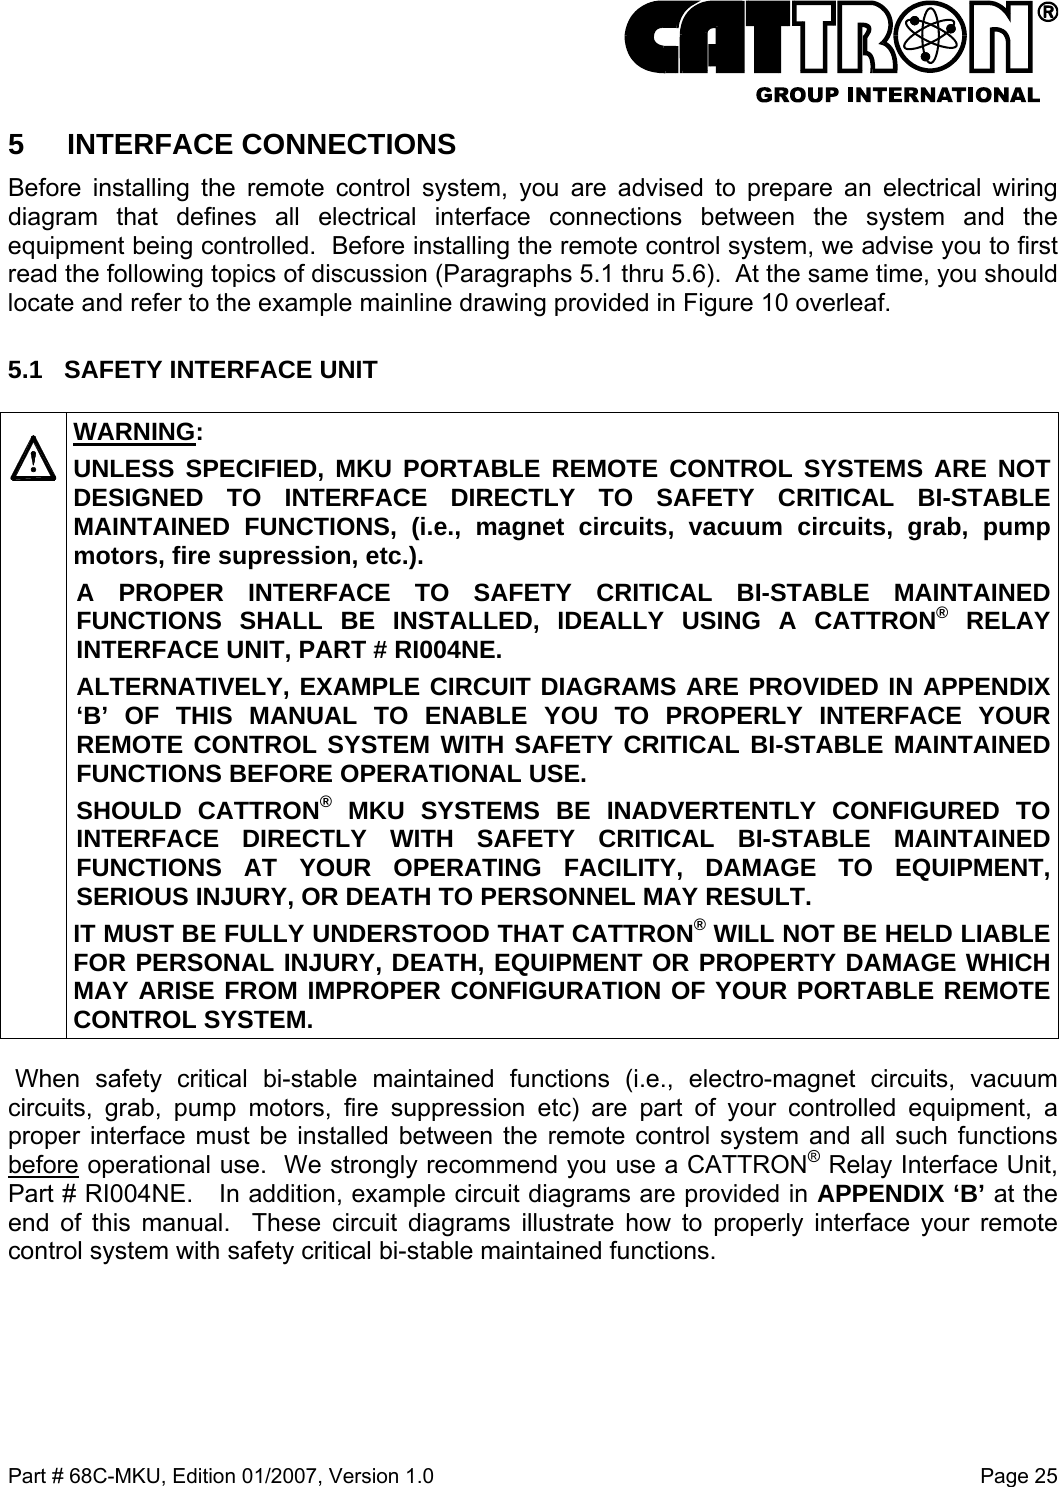  Part # 68C-MKU, Edition 01/2007, Version 1.0  Page 25   5 INTERFACE CONNECTIONS Before installing the remote control system, you are advised to prepare an electrical wiring diagram that defines all electrical interface connections between the system and the equipment being controlled.  Before installing the remote control system, we advise you to first read the following topics of discussion (Paragraphs 5.1 thru 5.6).  At the same time, you should locate and refer to the example mainline drawing provided in Figure 10 overleaf. 5.1  SAFETY INTERFACE UNIT    WARNING: UNLESS SPECIFIED, MKU PORTABLE REMOTE CONTROL SYSTEMS ARE NOT DESIGNED TO INTERFACE DIRECTLY TO SAFETY CRITICAL BI-STABLE MAINTAINED FUNCTIONS, (i.e., magnet circuits, vacuum circuits, grab, pump motors, fire supression, etc.).   A PROPER INTERFACE TO SAFETY CRITICAL BI-STABLE MAINTAINED FUNCTIONS SHALL BE INSTALLED, IDEALLY USING A CATTRON®RELAY INTERFACE UNIT, PART # RI004NE.  ALTERNATIVELY, EXAMPLE CIRCUIT DIAGRAMS ARE PROVIDED IN APPENDIX ‘B’ OF THIS MANUAL TO ENABLE YOU TO PROPERLY INTERFACE YOUR REMOTE CONTROL SYSTEM WITH SAFETY CRITICAL BI-STABLE MAINTAINED FUNCTIONS BEFORE OPERATIONAL USE. SHOULD CATTRON® MKU SYSTEMS BE INADVERTENTLY CONFIGURED TO INTERFACE DIRECTLY WITH SAFETY CRITICAL BI-STABLE MAINTAINED FUNCTIONS AT YOUR OPERATING FACILITY, DAMAGE TO EQUIPMENT, SERIOUS INJURY, OR DEATH TO PERSONNEL MAY RESULT.   IT MUST BE FULLY UNDERSTOOD THAT CATTRON®WILL NOT BE HELD LIABLE FOR PERSONAL INJURY, DEATH, EQUIPMENT OR PROPERTY DAMAGE WHICH MAY ARISE FROM IMPROPER CONFIGURATION OF YOUR PORTABLE REMOTE CONTROL SYSTEM.  When safety critical bi-stable maintained functions (i.e., electro-magnet circuits, vacuum circuits, grab, pump motors, fire suppression etc) are part of your controlled equipment, a proper interface must be installed between the remote control system and all such functions before operational use.  We strongly recommend you use a CATTRON® Relay Interface Unit, Part # RI004NE.   In addition, example circuit diagrams are provided in APPENDIX ‘B’ at the end of this manual.  These circuit diagrams illustrate how to properly interface your remote control system with safety critical bi-stable maintained functions. 